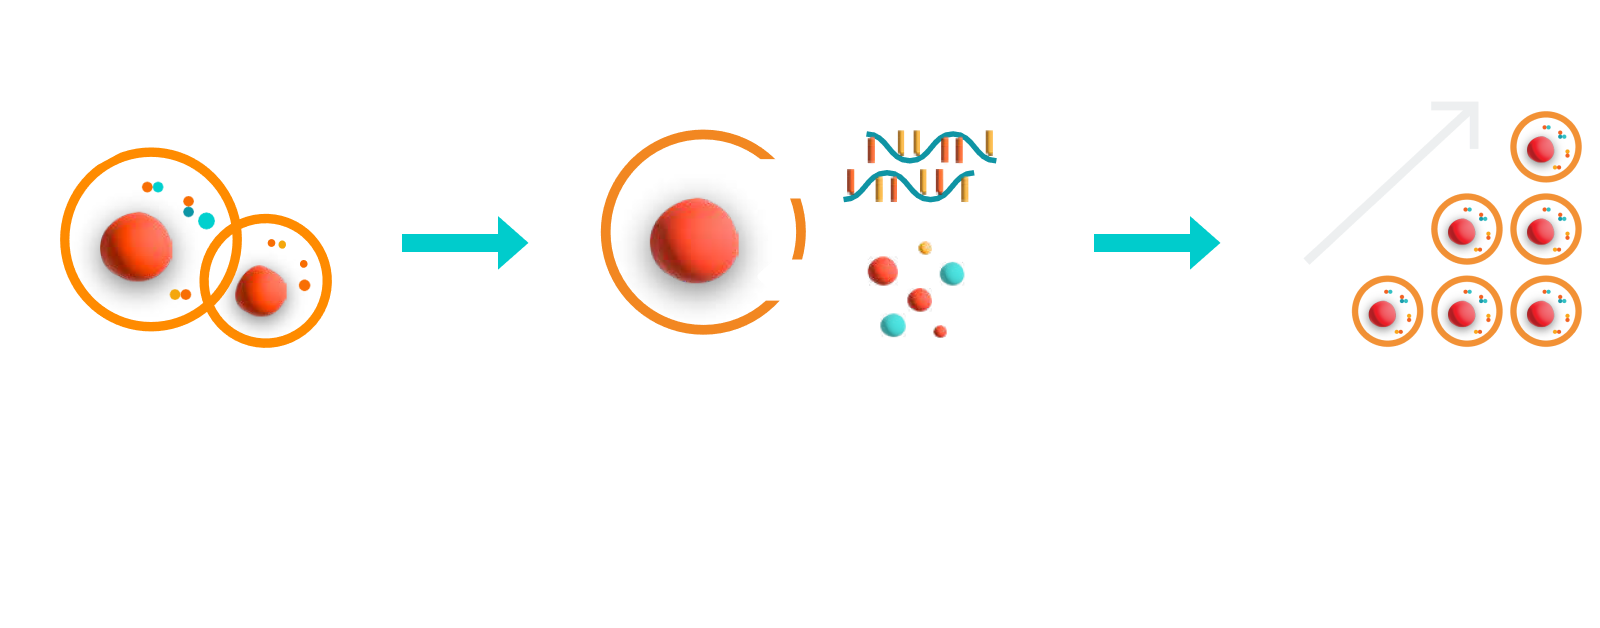 image shows three icons in progression. The first icon shows two cells being compressed with the text "ensures gentle cell processing" underneath. An arrow points to the second icon, which shows strands mRNA and payload being delivered into the cell with text underneath that reads "enables complex gene editing." A final arrow points to the last icon that shows cells stacking upward in a triangle shape, the text underneath reads "delivers high yields."